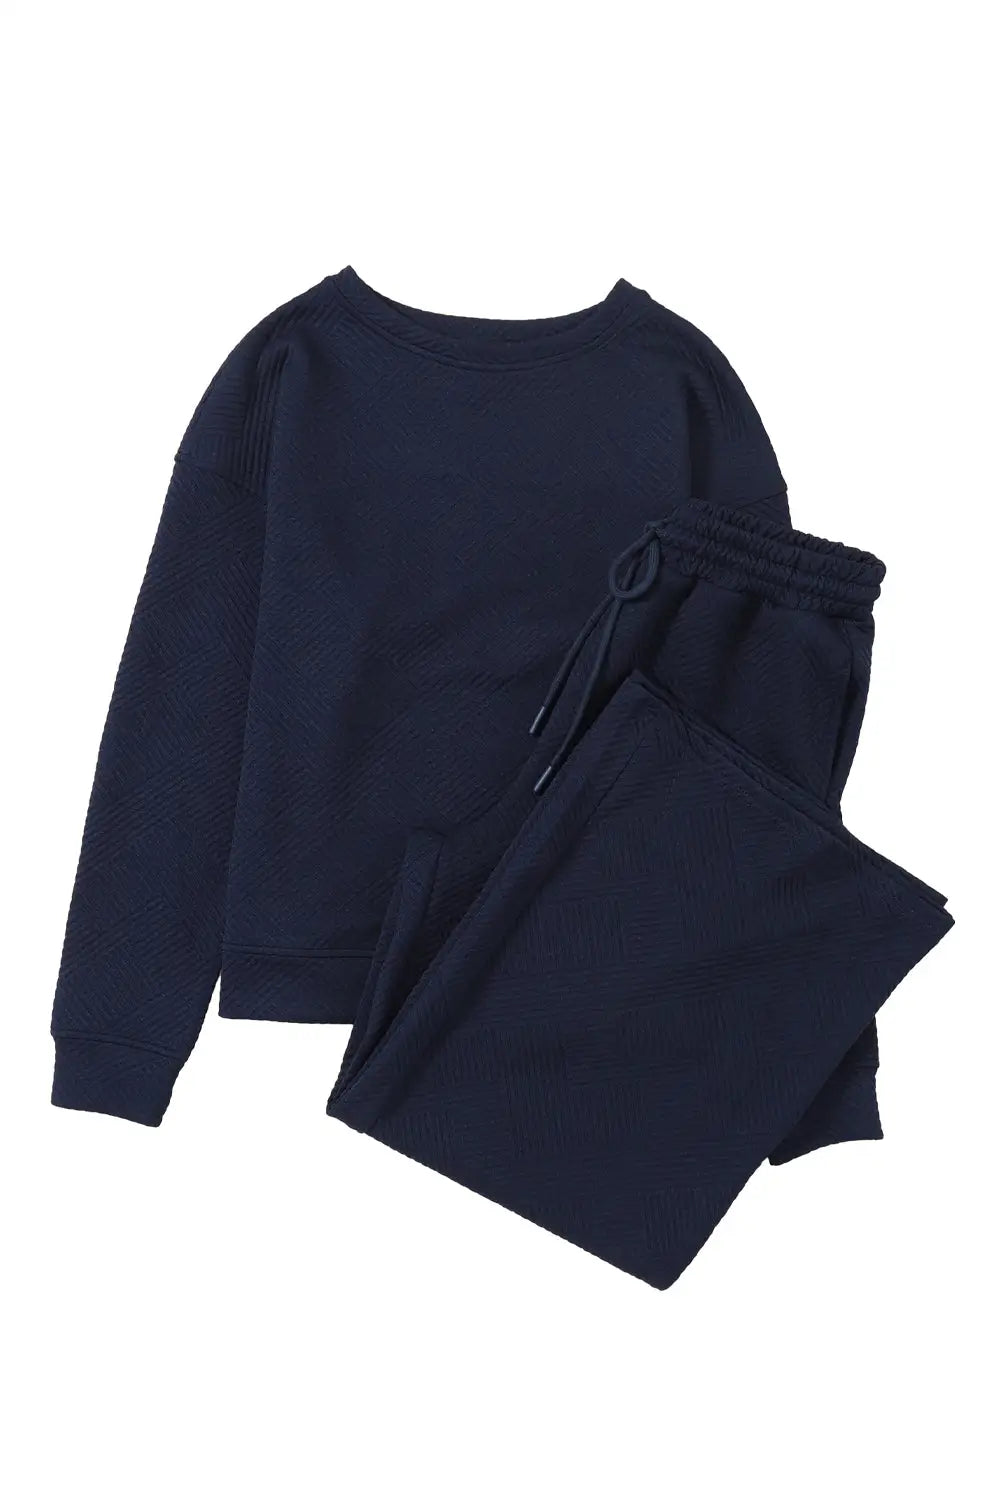 Navy blue ultra loose textured 2pcs slouchy outfit - pants sets